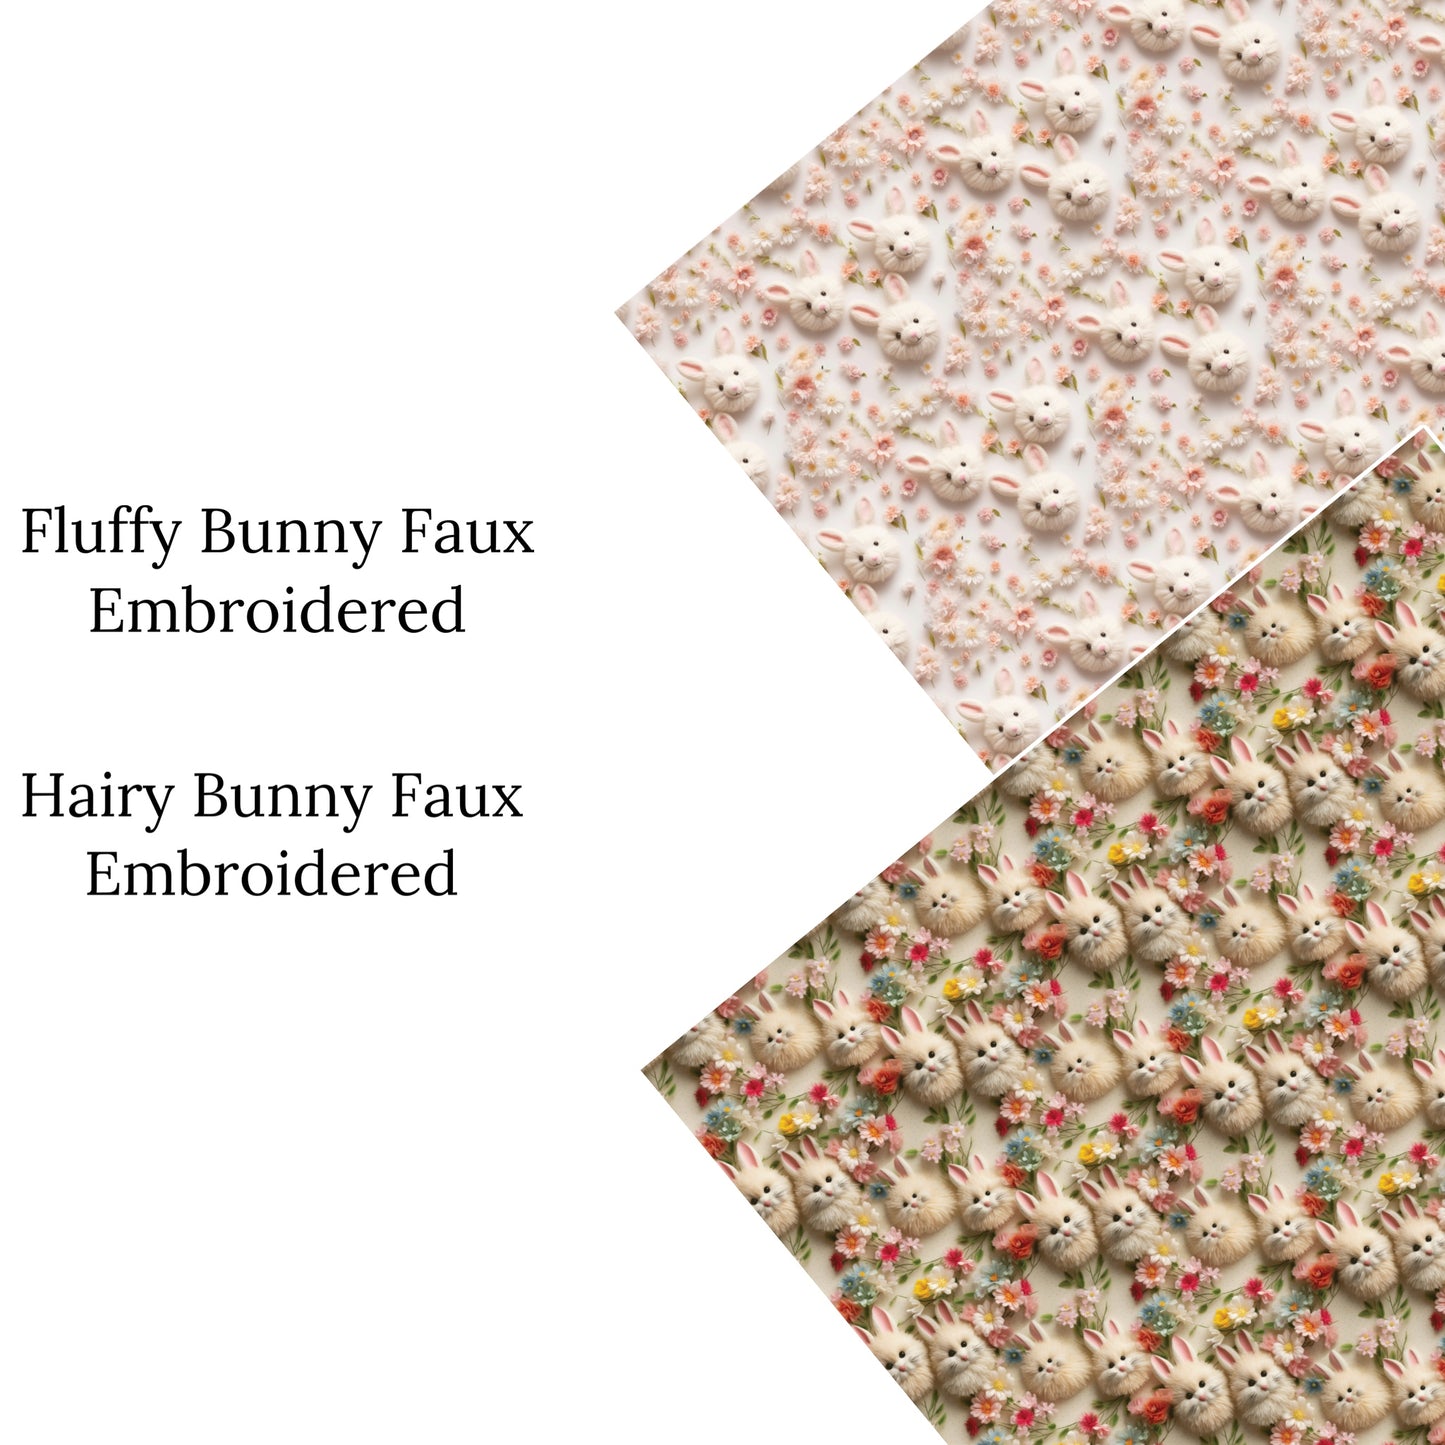 Fluffy Bunny Faux Embroidered Faux Leather Sheets